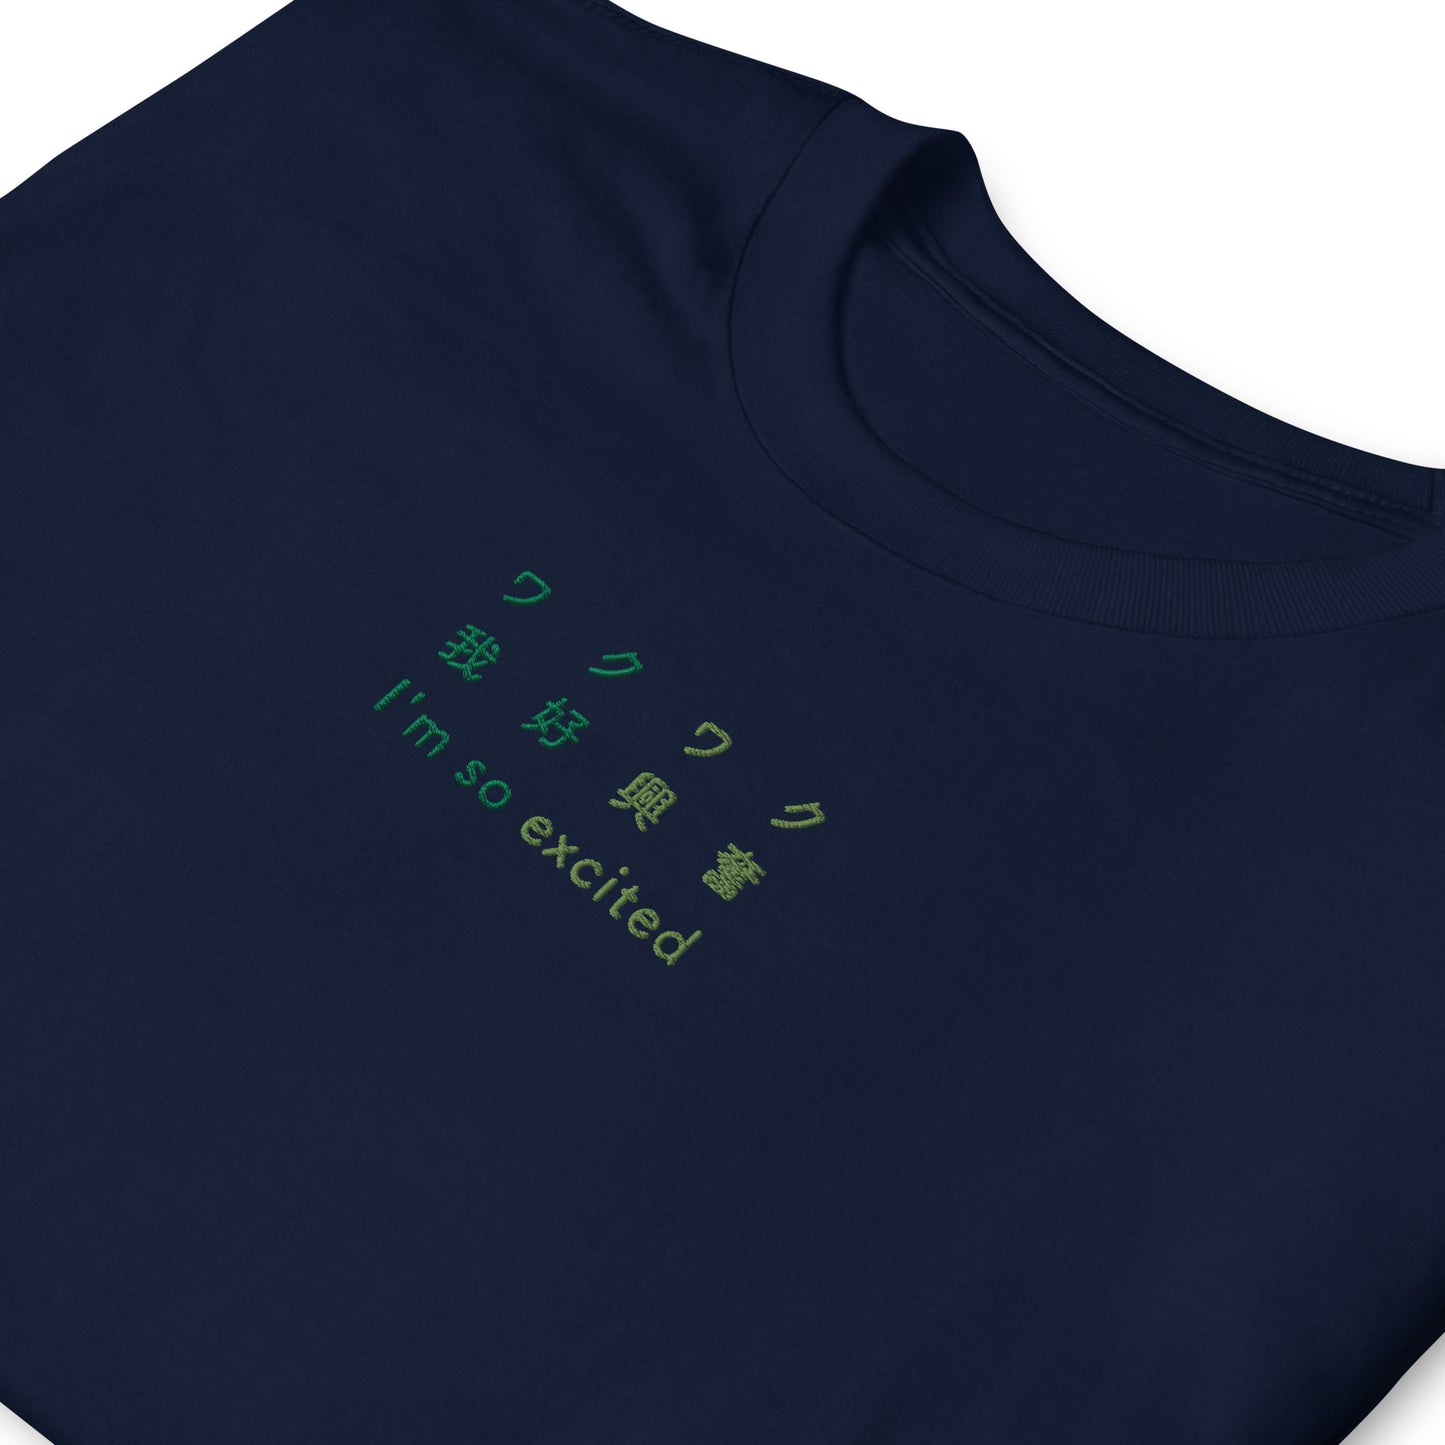 Navy High Quality Tee - Front Design with a Gradient Green Embroidery "I'm so excited" in Japanese,Chinese and English